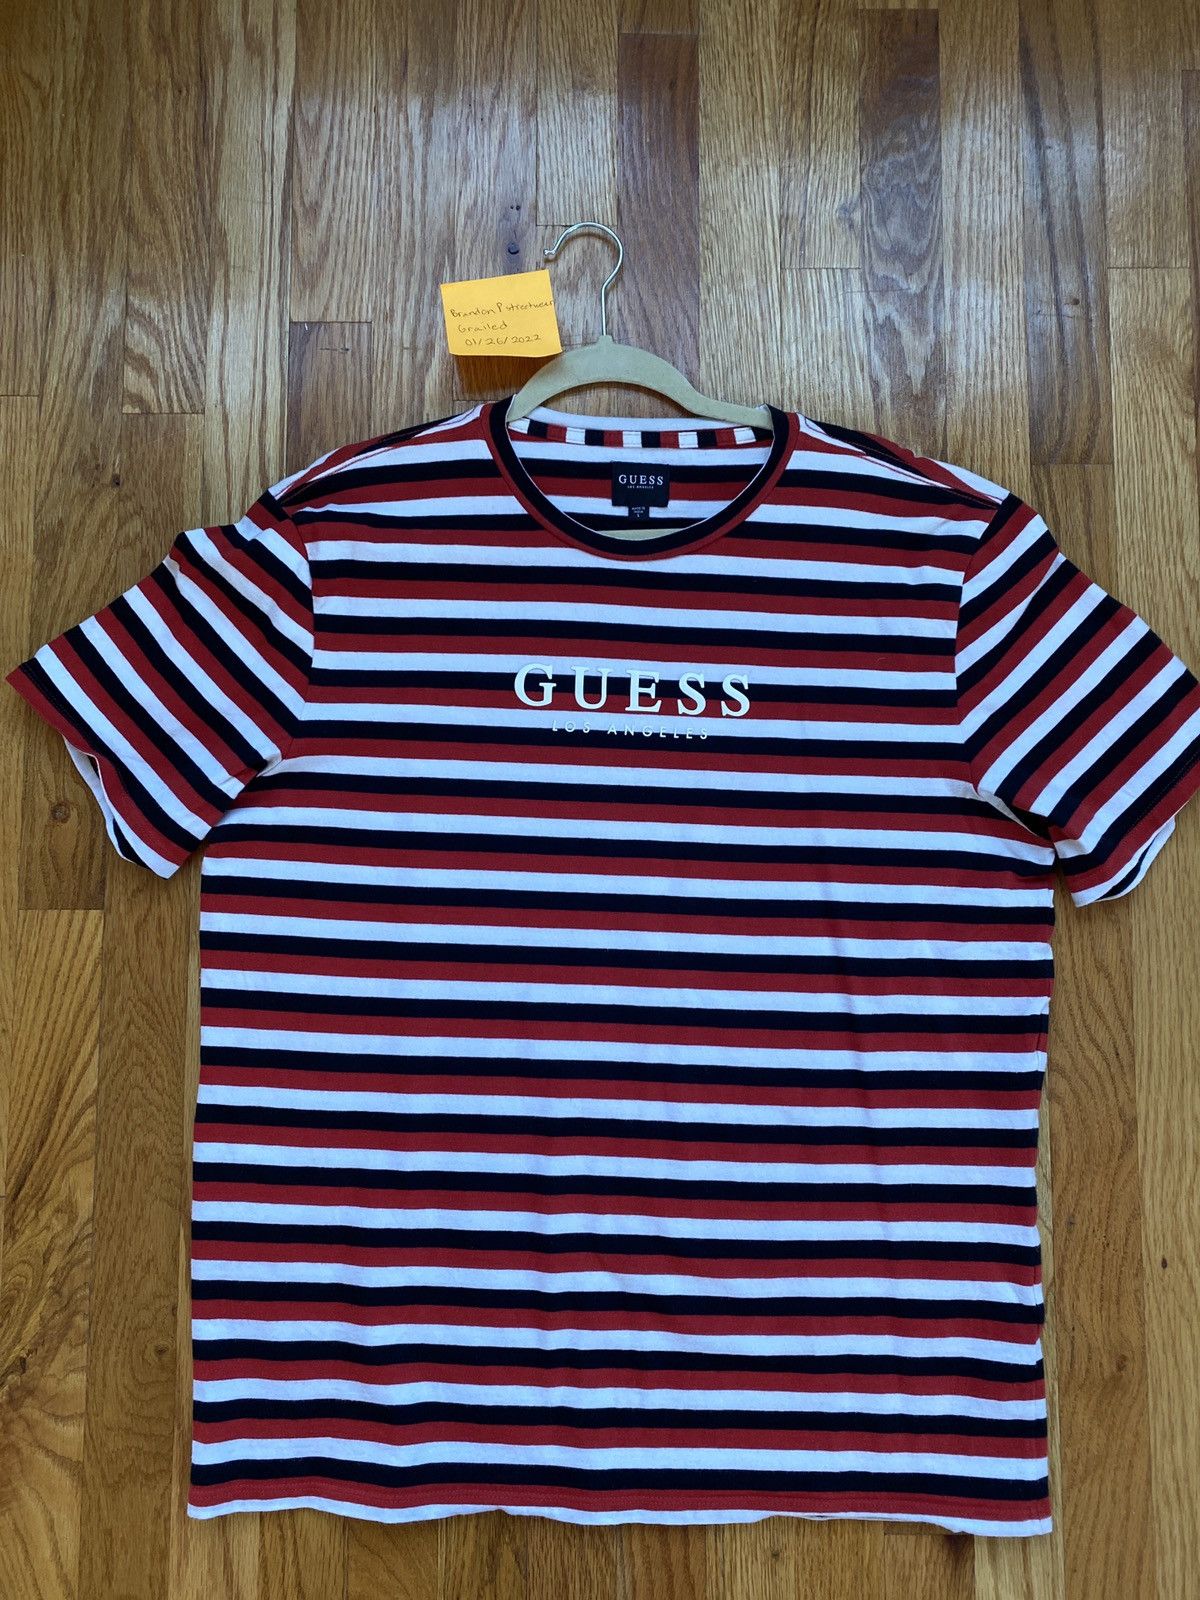 Guess Guess Angeles USA red black white | Grailed